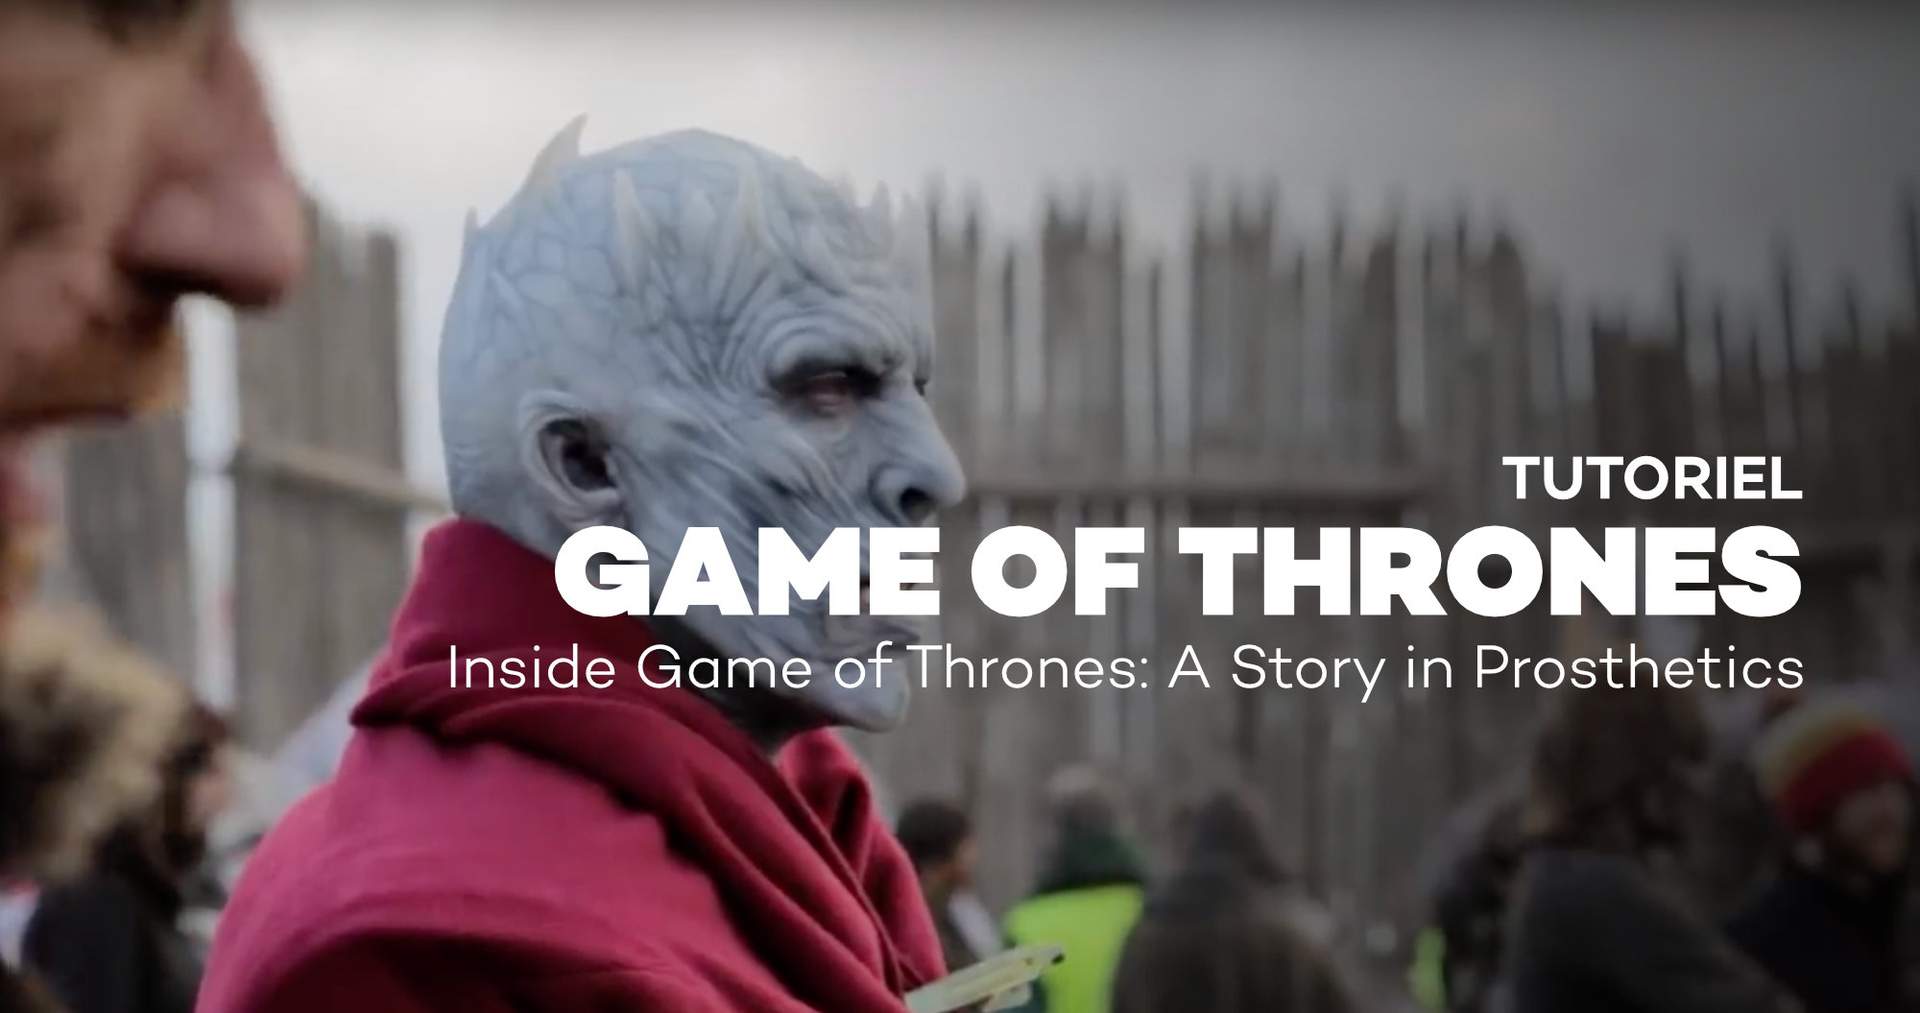 Tutorial: Inside Game of Thrones - A Story in Prosthetics